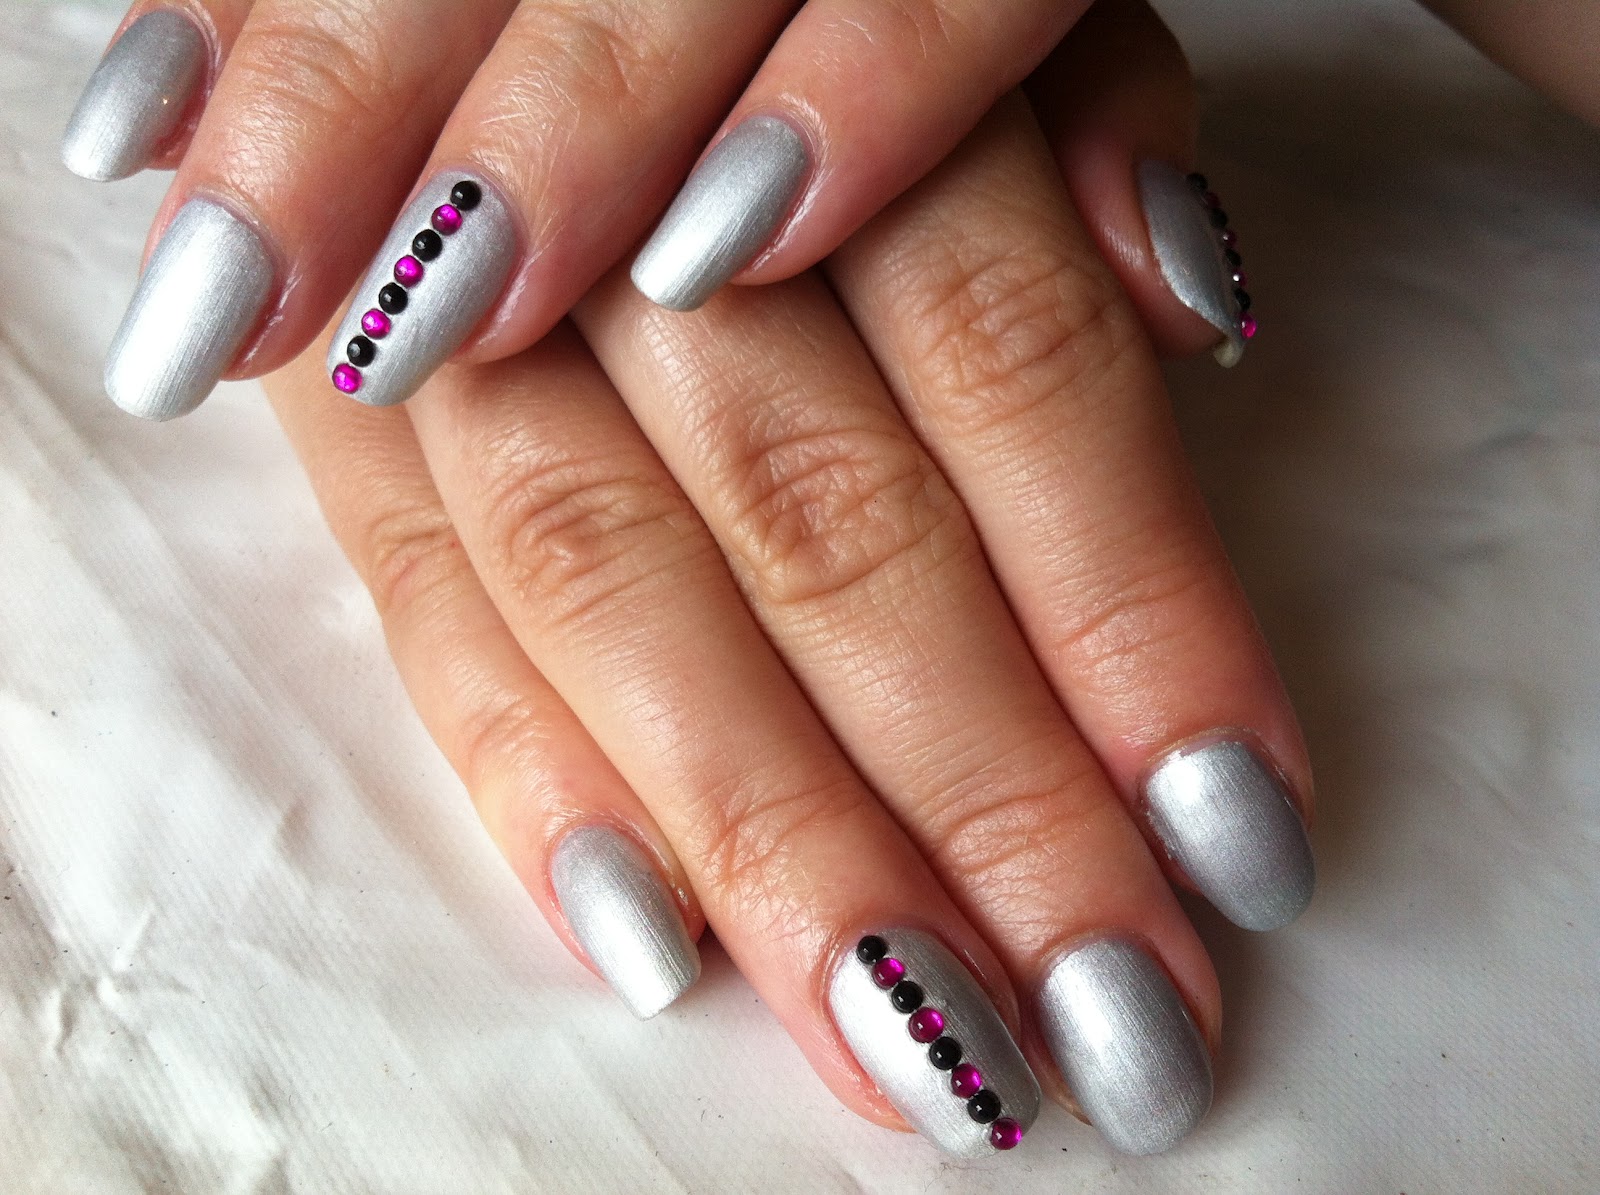 1. CND Shellac Nail Art Tutorials: How to Create Beautiful Nails at Home - wide 3